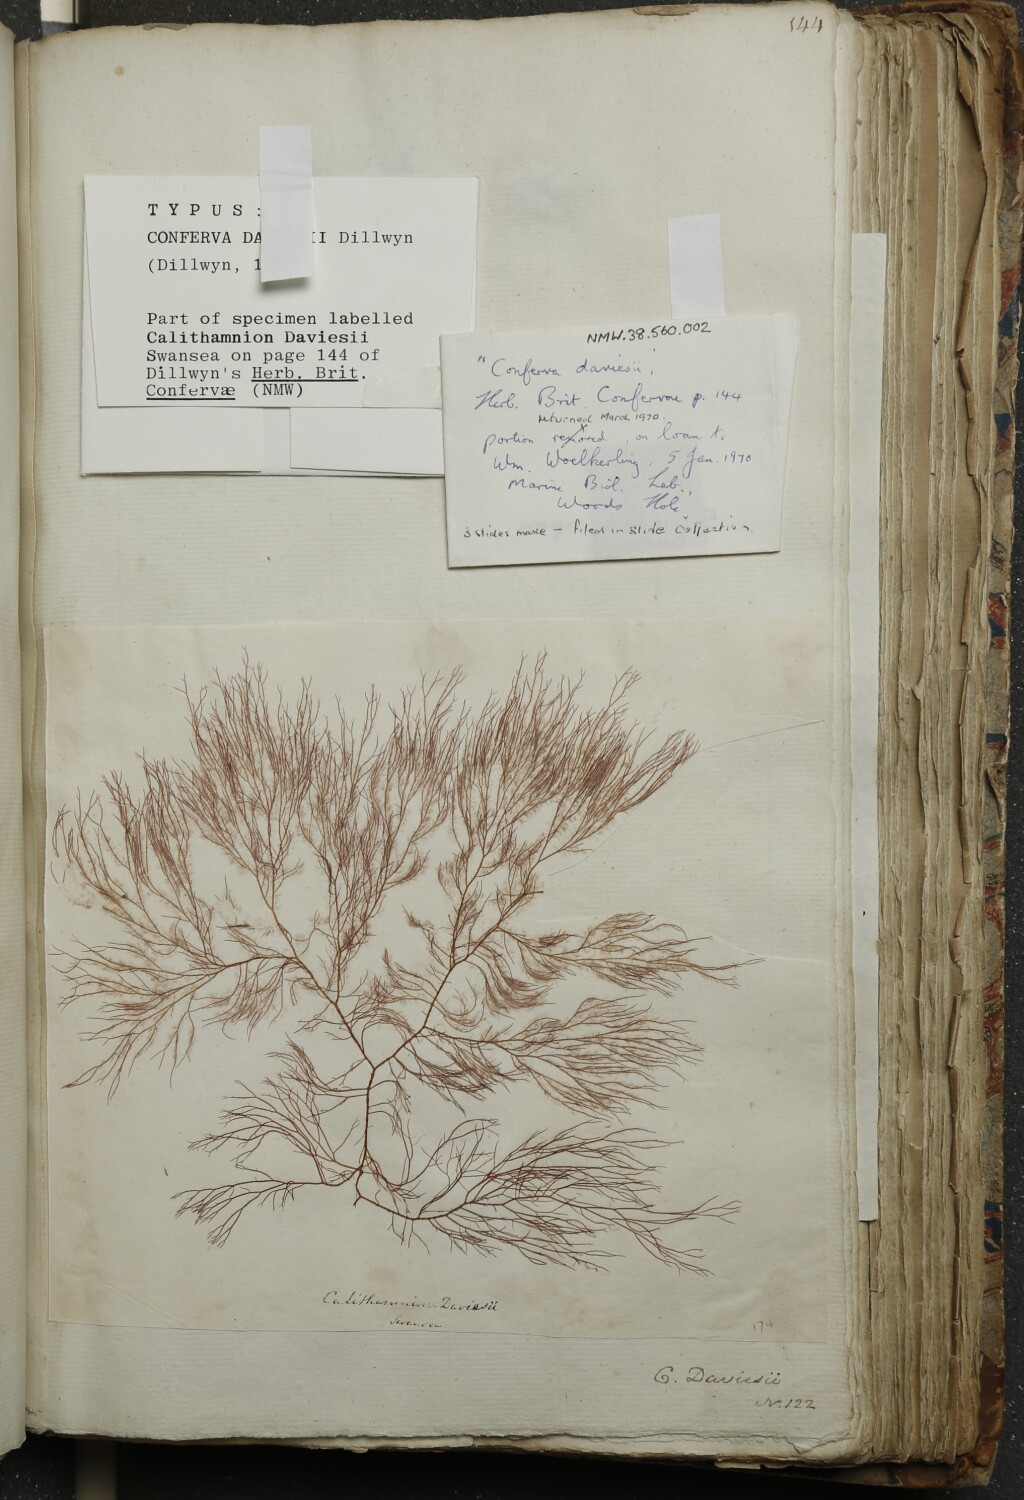 exsiccatae specimen – paper with dried plant attached